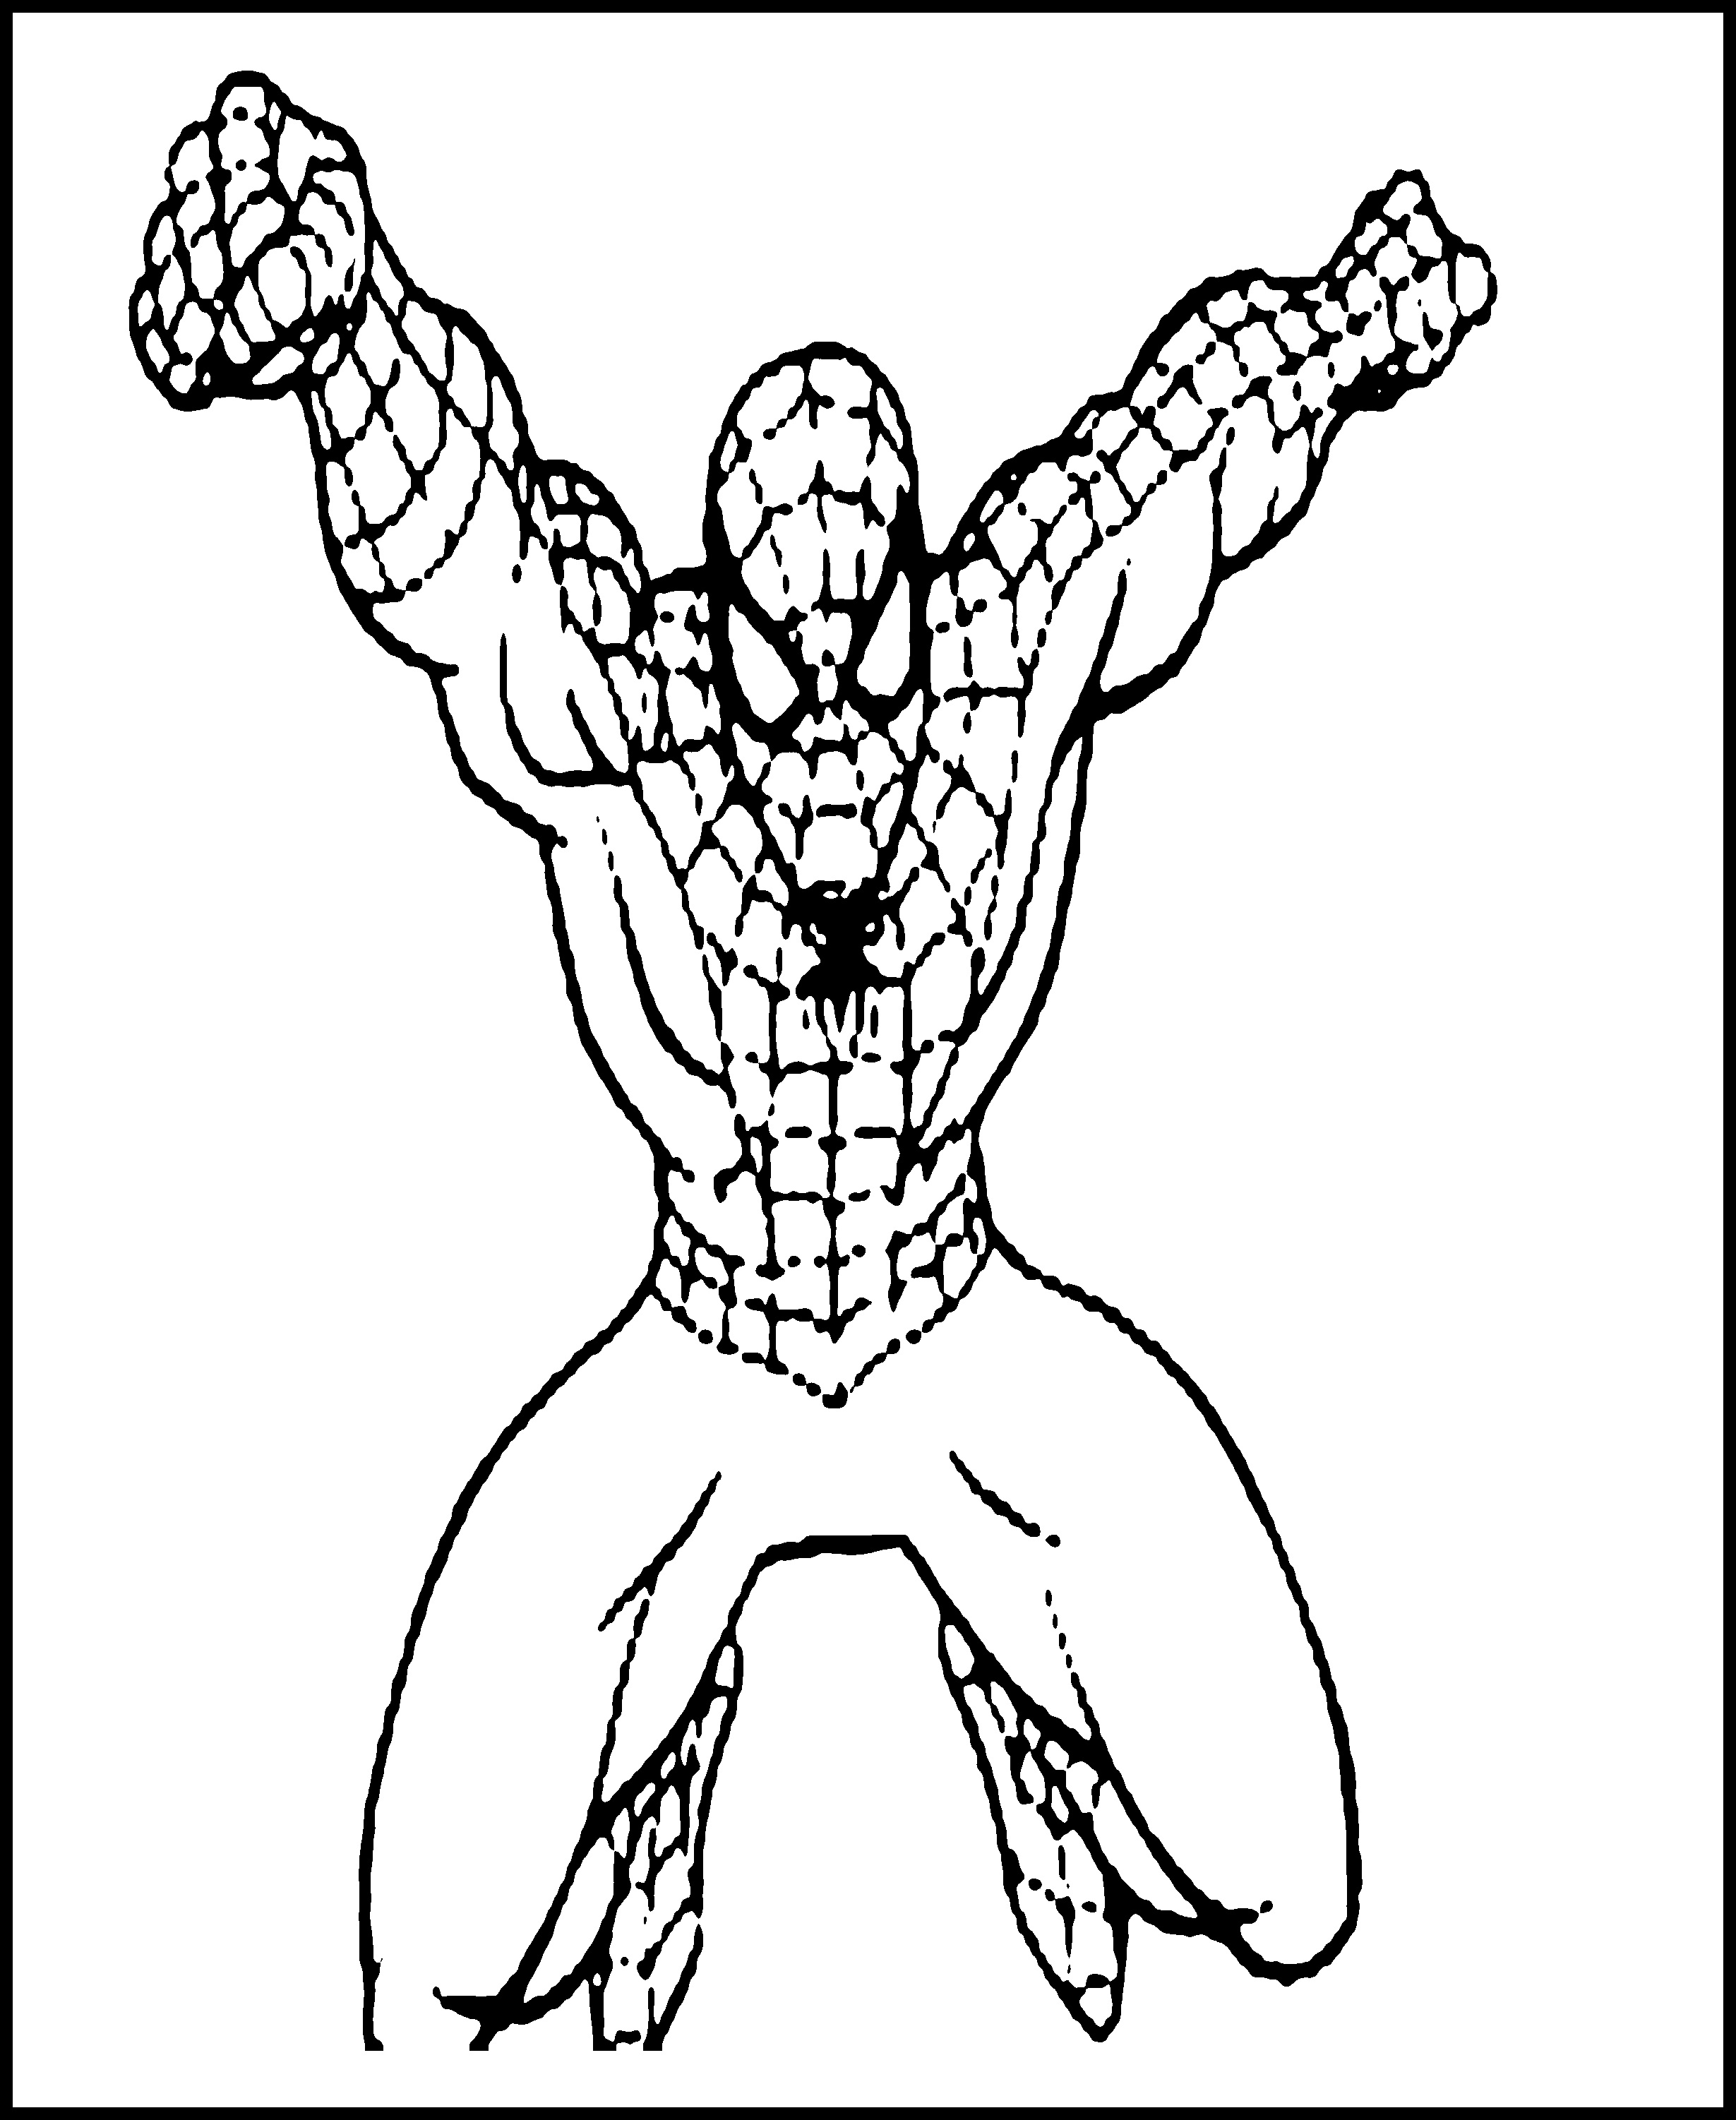 Spiderman Coloring pages | Coloring page | FREE Coloring ...